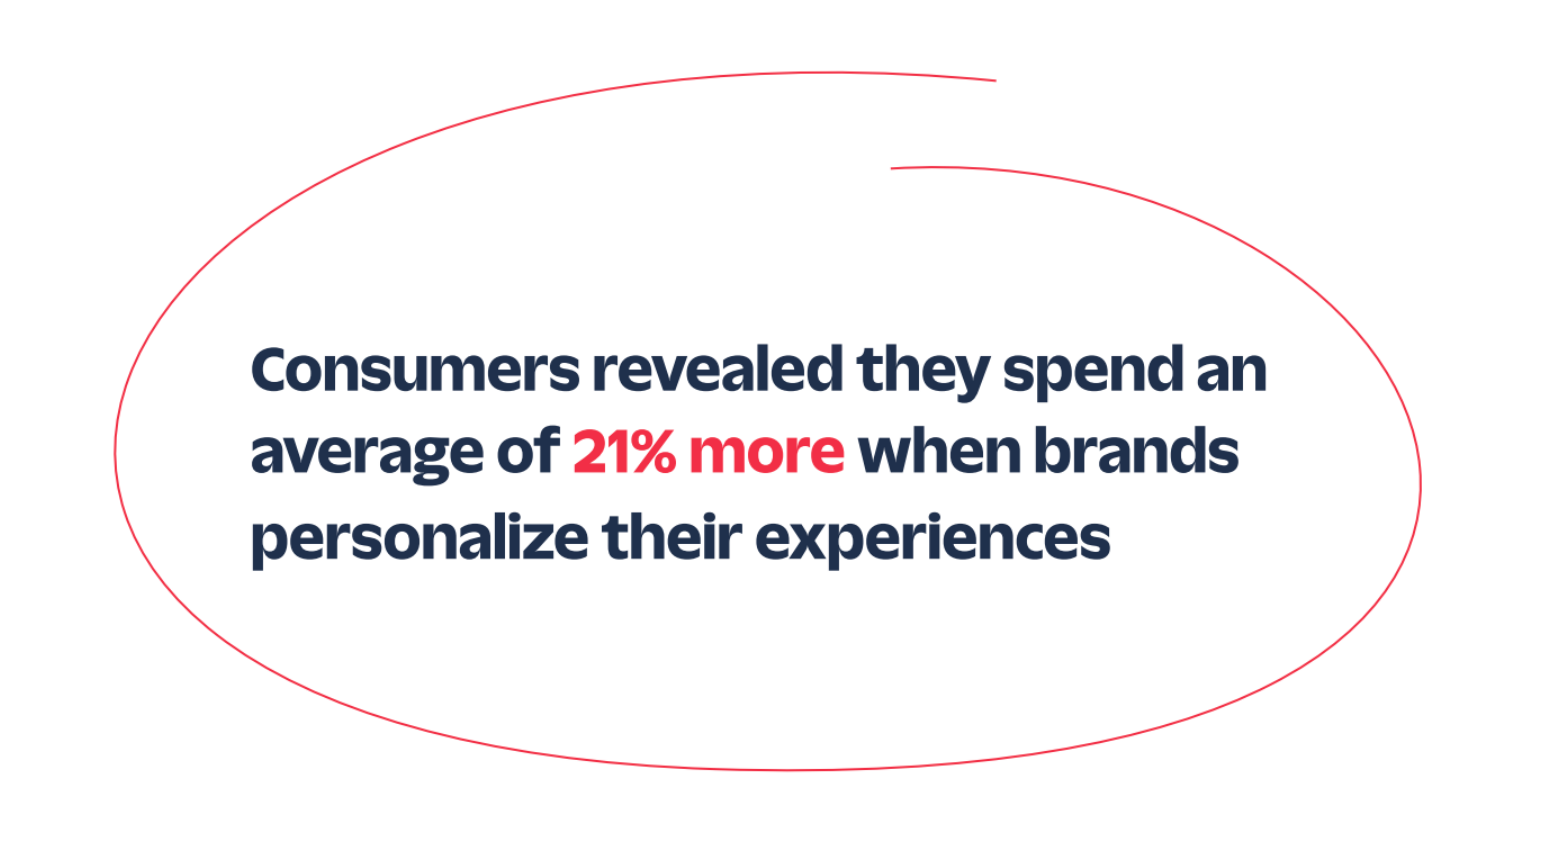 Consumers revealed that they spend an average of 21% more when brands personalize their experiences.